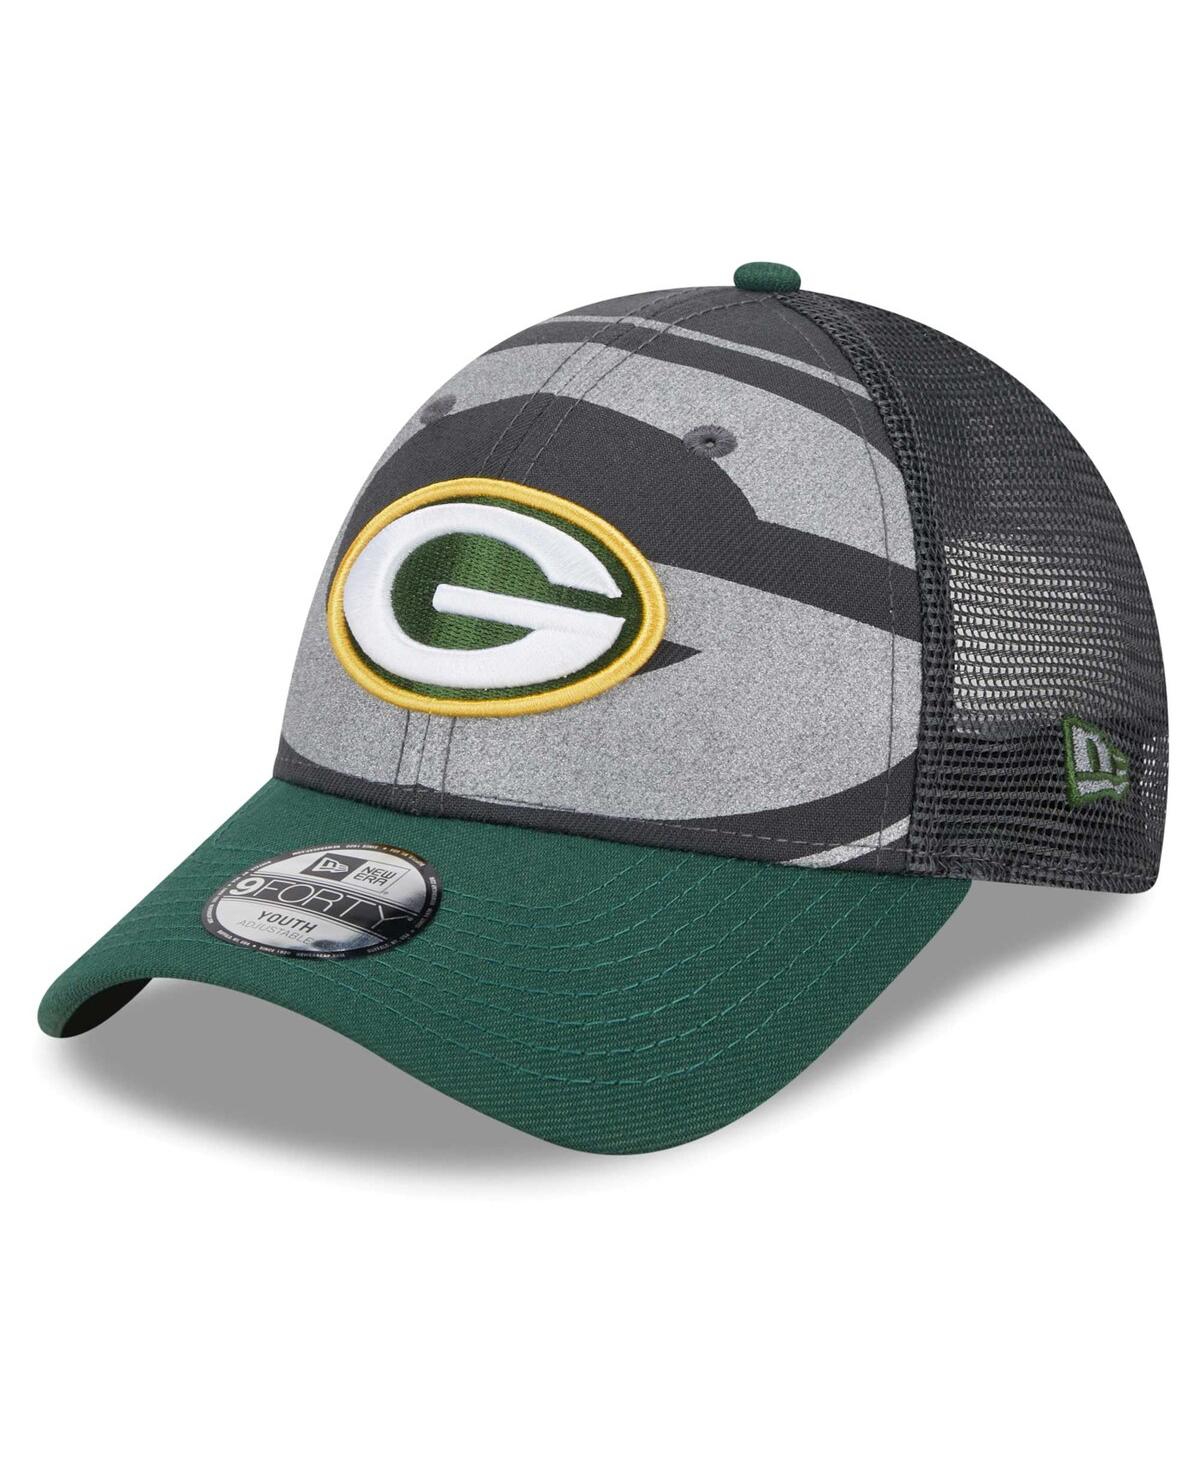 Shop New Era Preschool Boys And Girls  Graphite, Green Green Bay Packers Reflect 9forty Adjustable Hat In Graphite,green